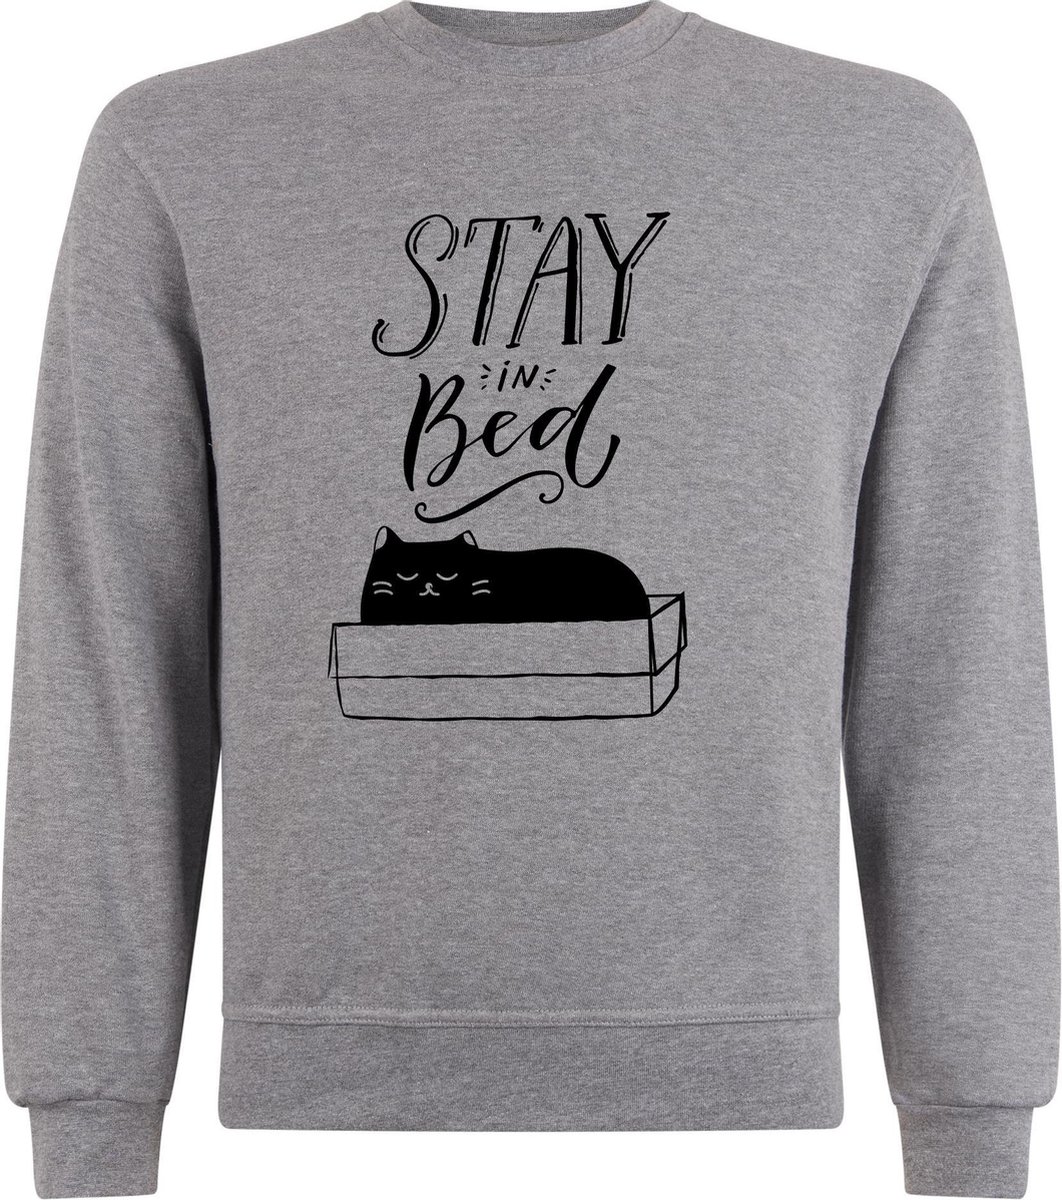 Sweater zonder capuchon - Jumper - Trui - Vest - Lifestyle sweater - Chill Sweater - Kat - Cat - Stay In Bed - S.Grey - L